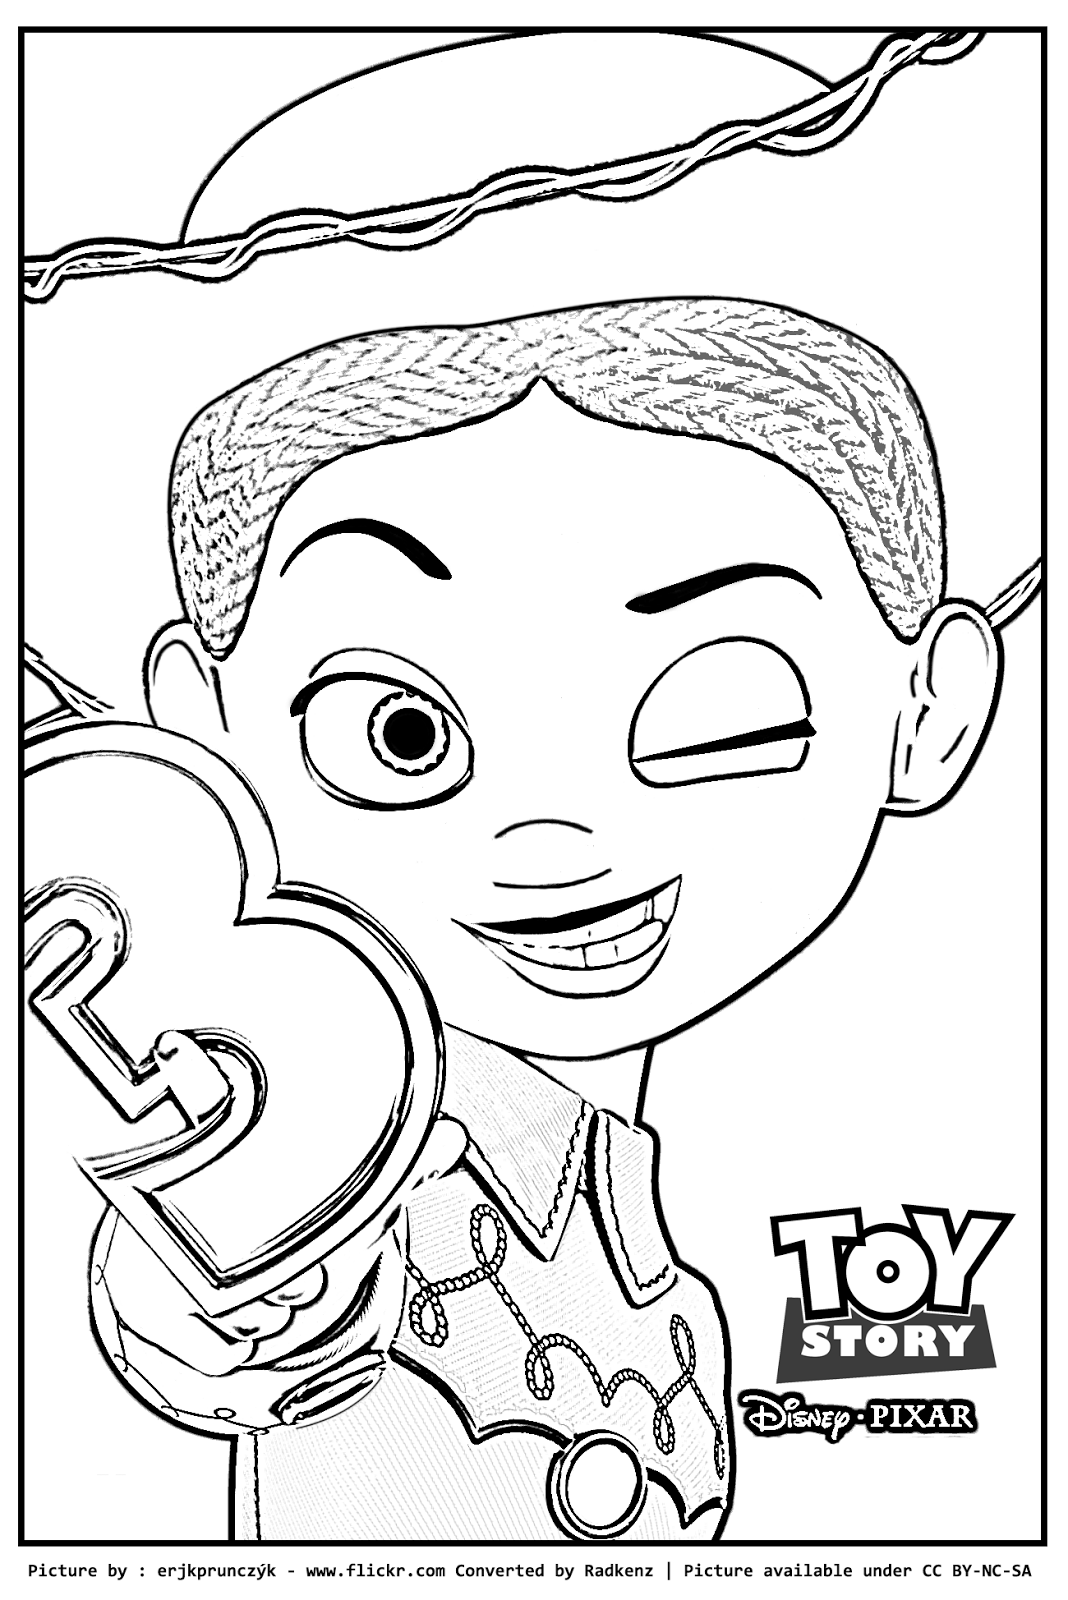 coloring pages updated max=2013 05 04T21 15 00 07 00&max results=20&start=20&by date=false